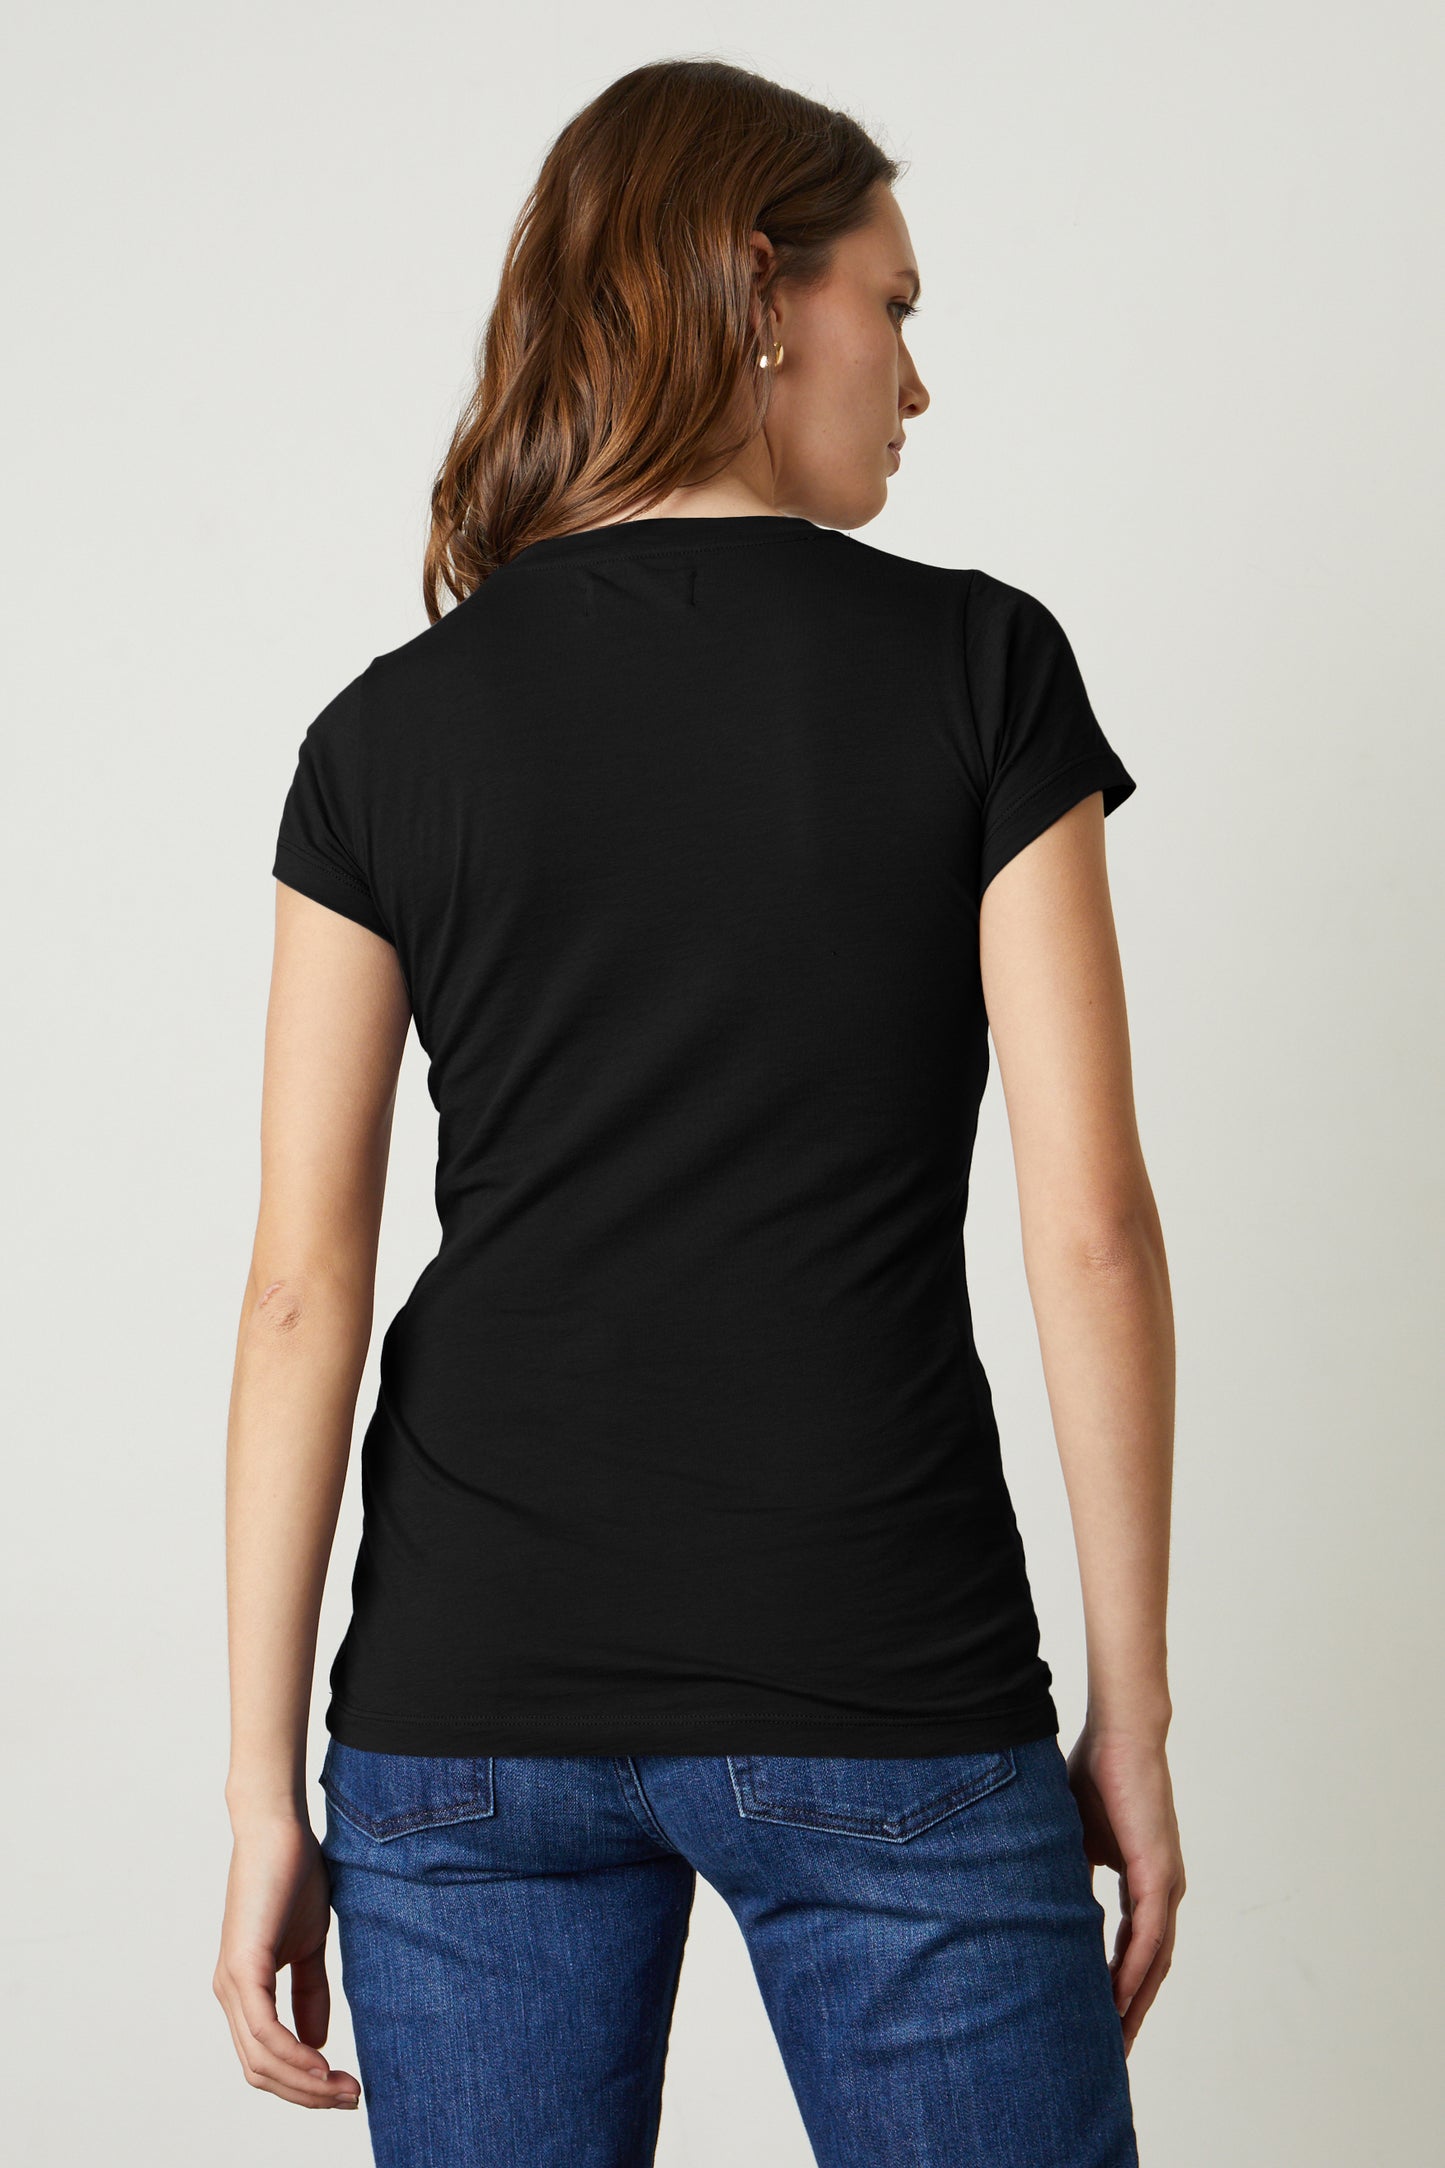 The back view of a woman wearing jeans and a Velvet by Graham & Spencer Jemma Gauzy Whisper Fitted Crew Neck Tee.-35416738267329